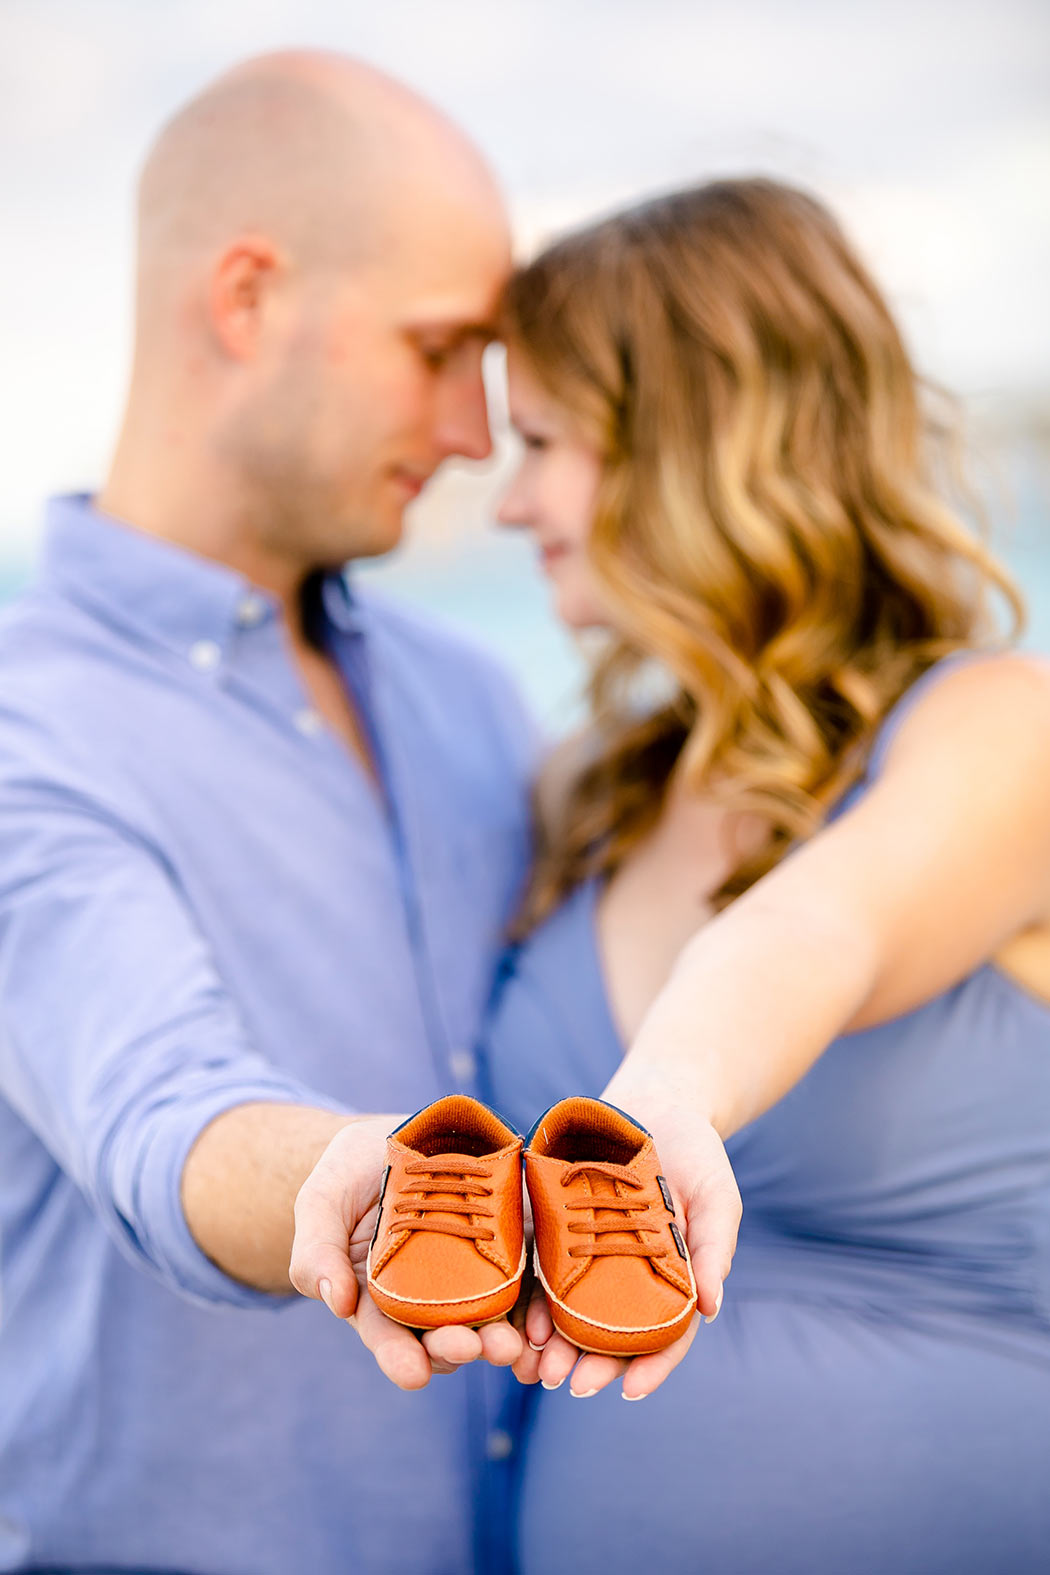 dania beach pier maternity photoshoot with couple | beach maternity pictures | fort lauderdale maternity photographer | maternity photos with baby shoes